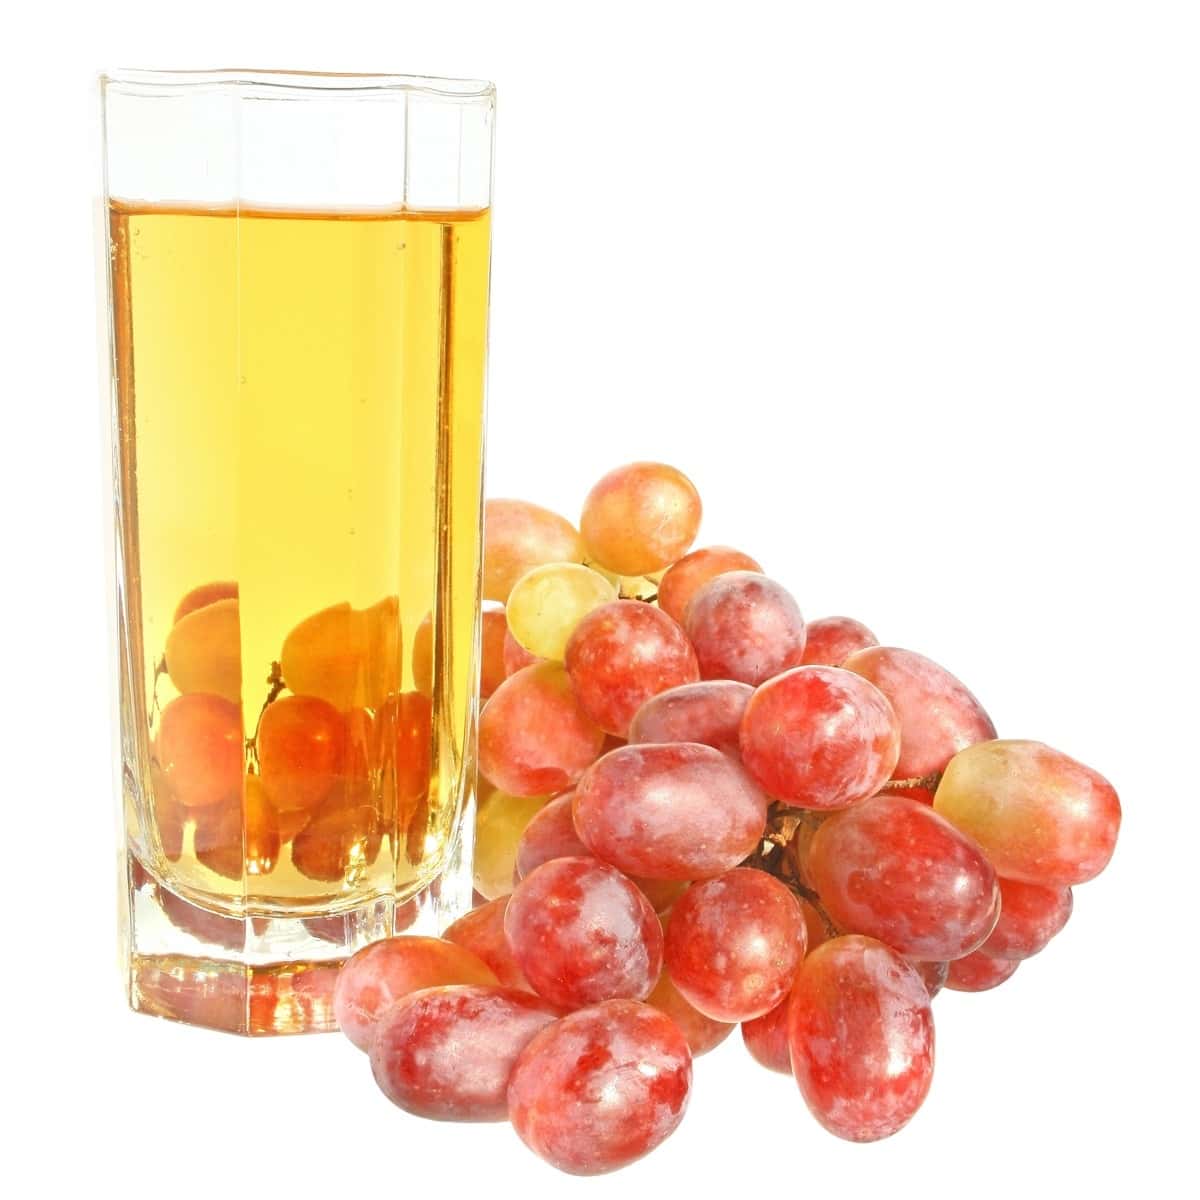 grapes and glass of juice of a grapes